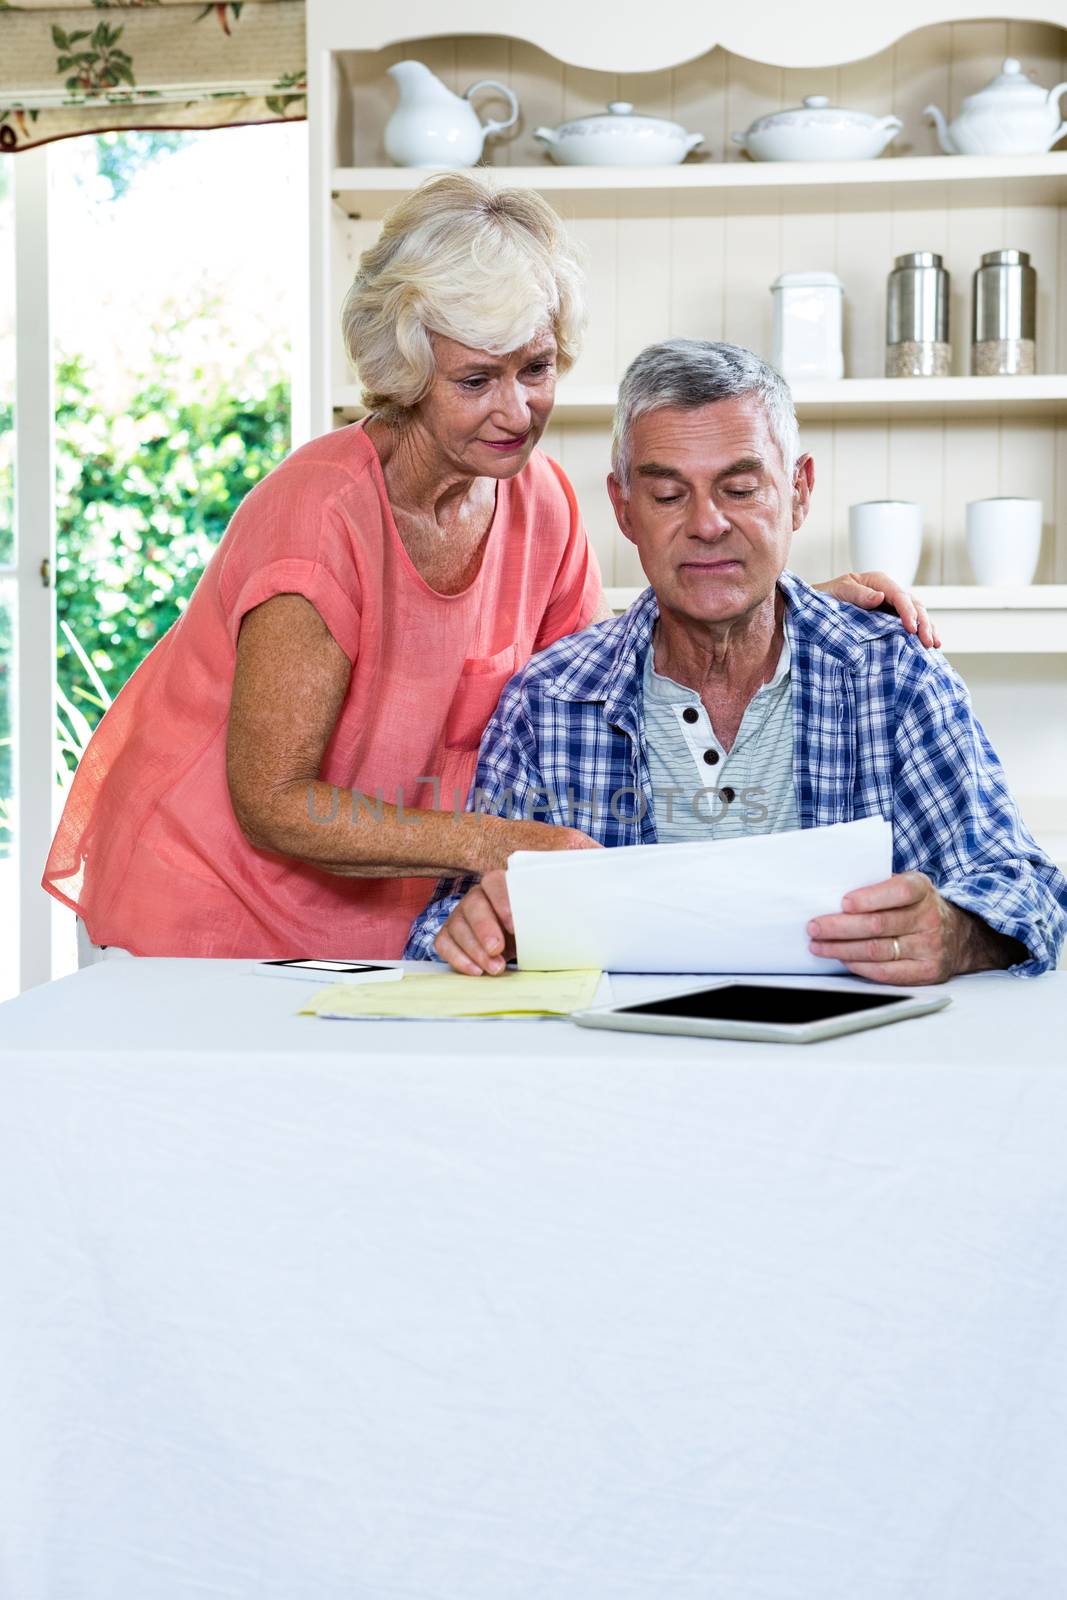 Wife discussing with senior man on documents at table against shelves